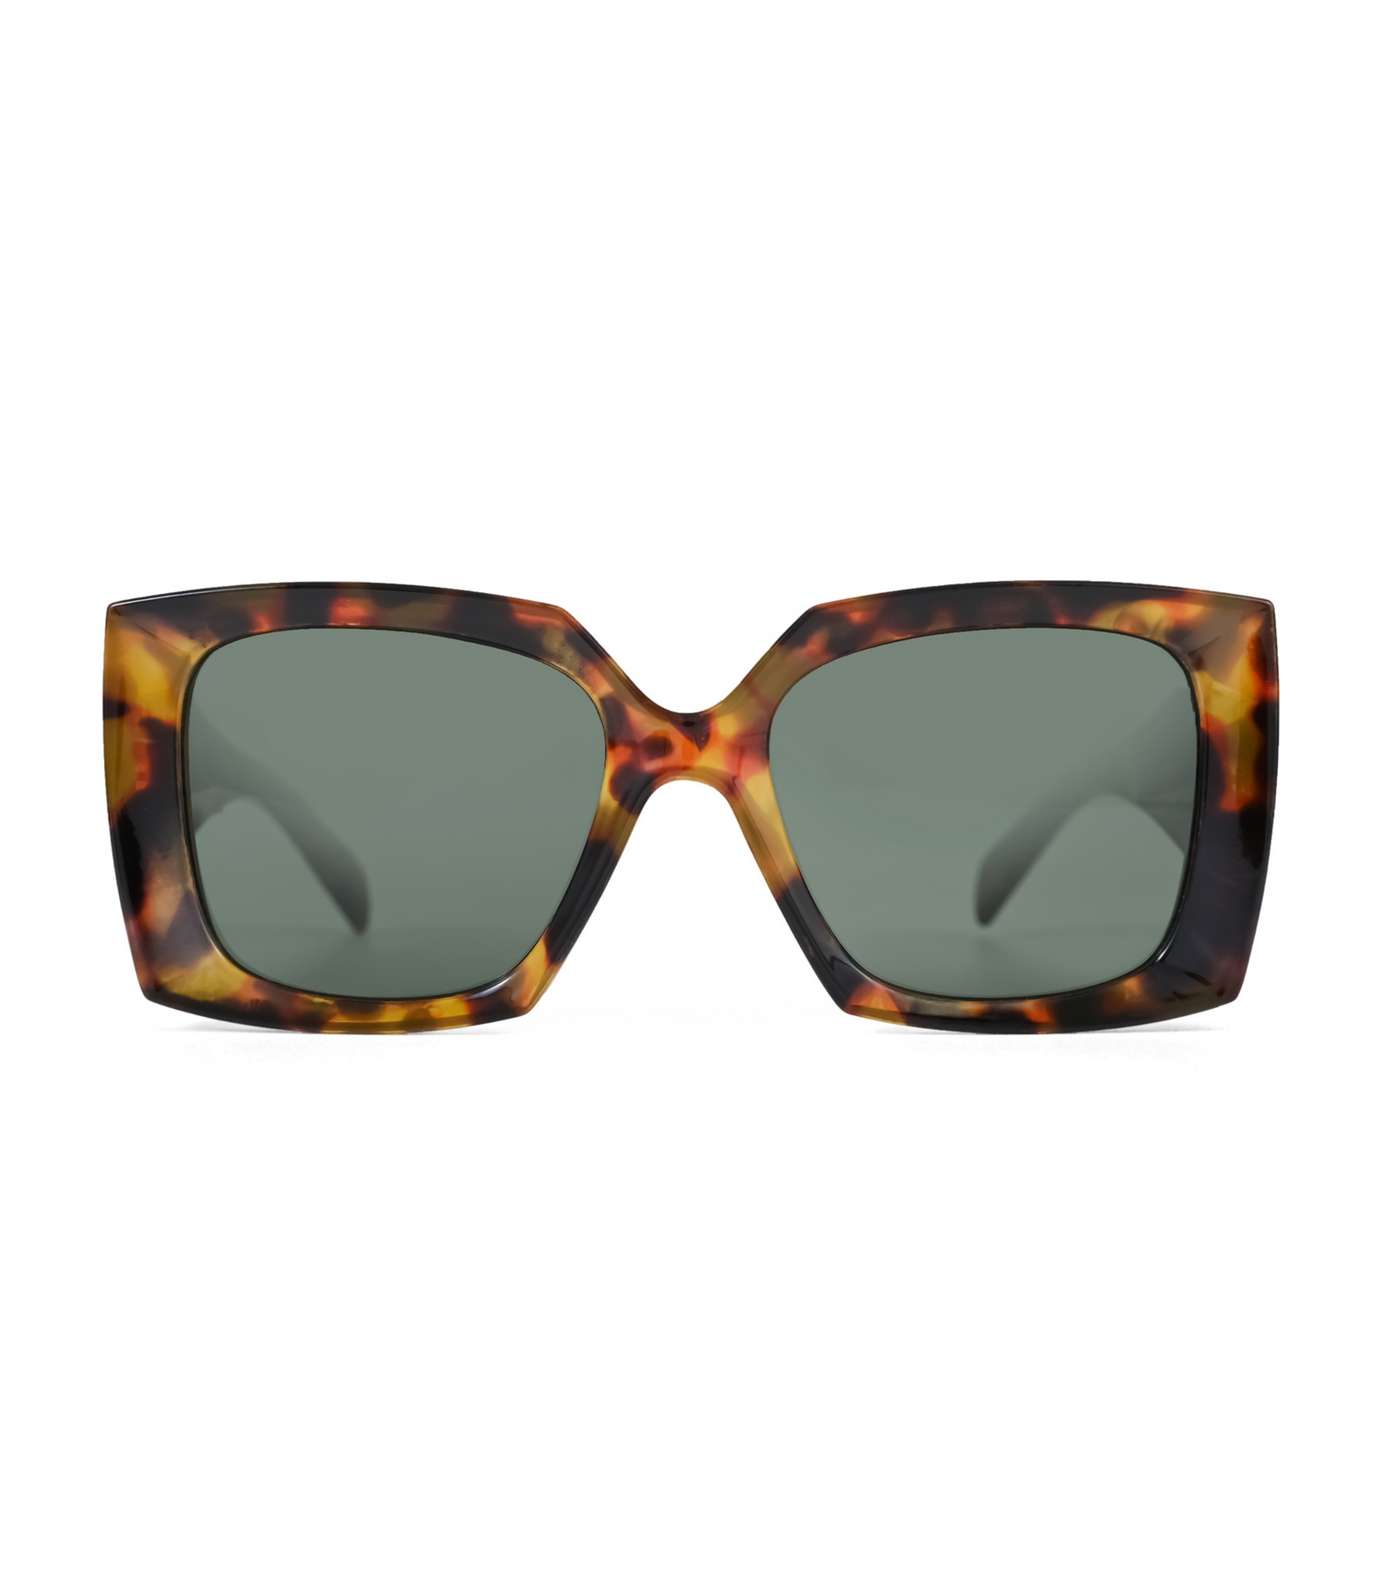 South Beach Brown Oversized Square Frame Sunglasses Image 3